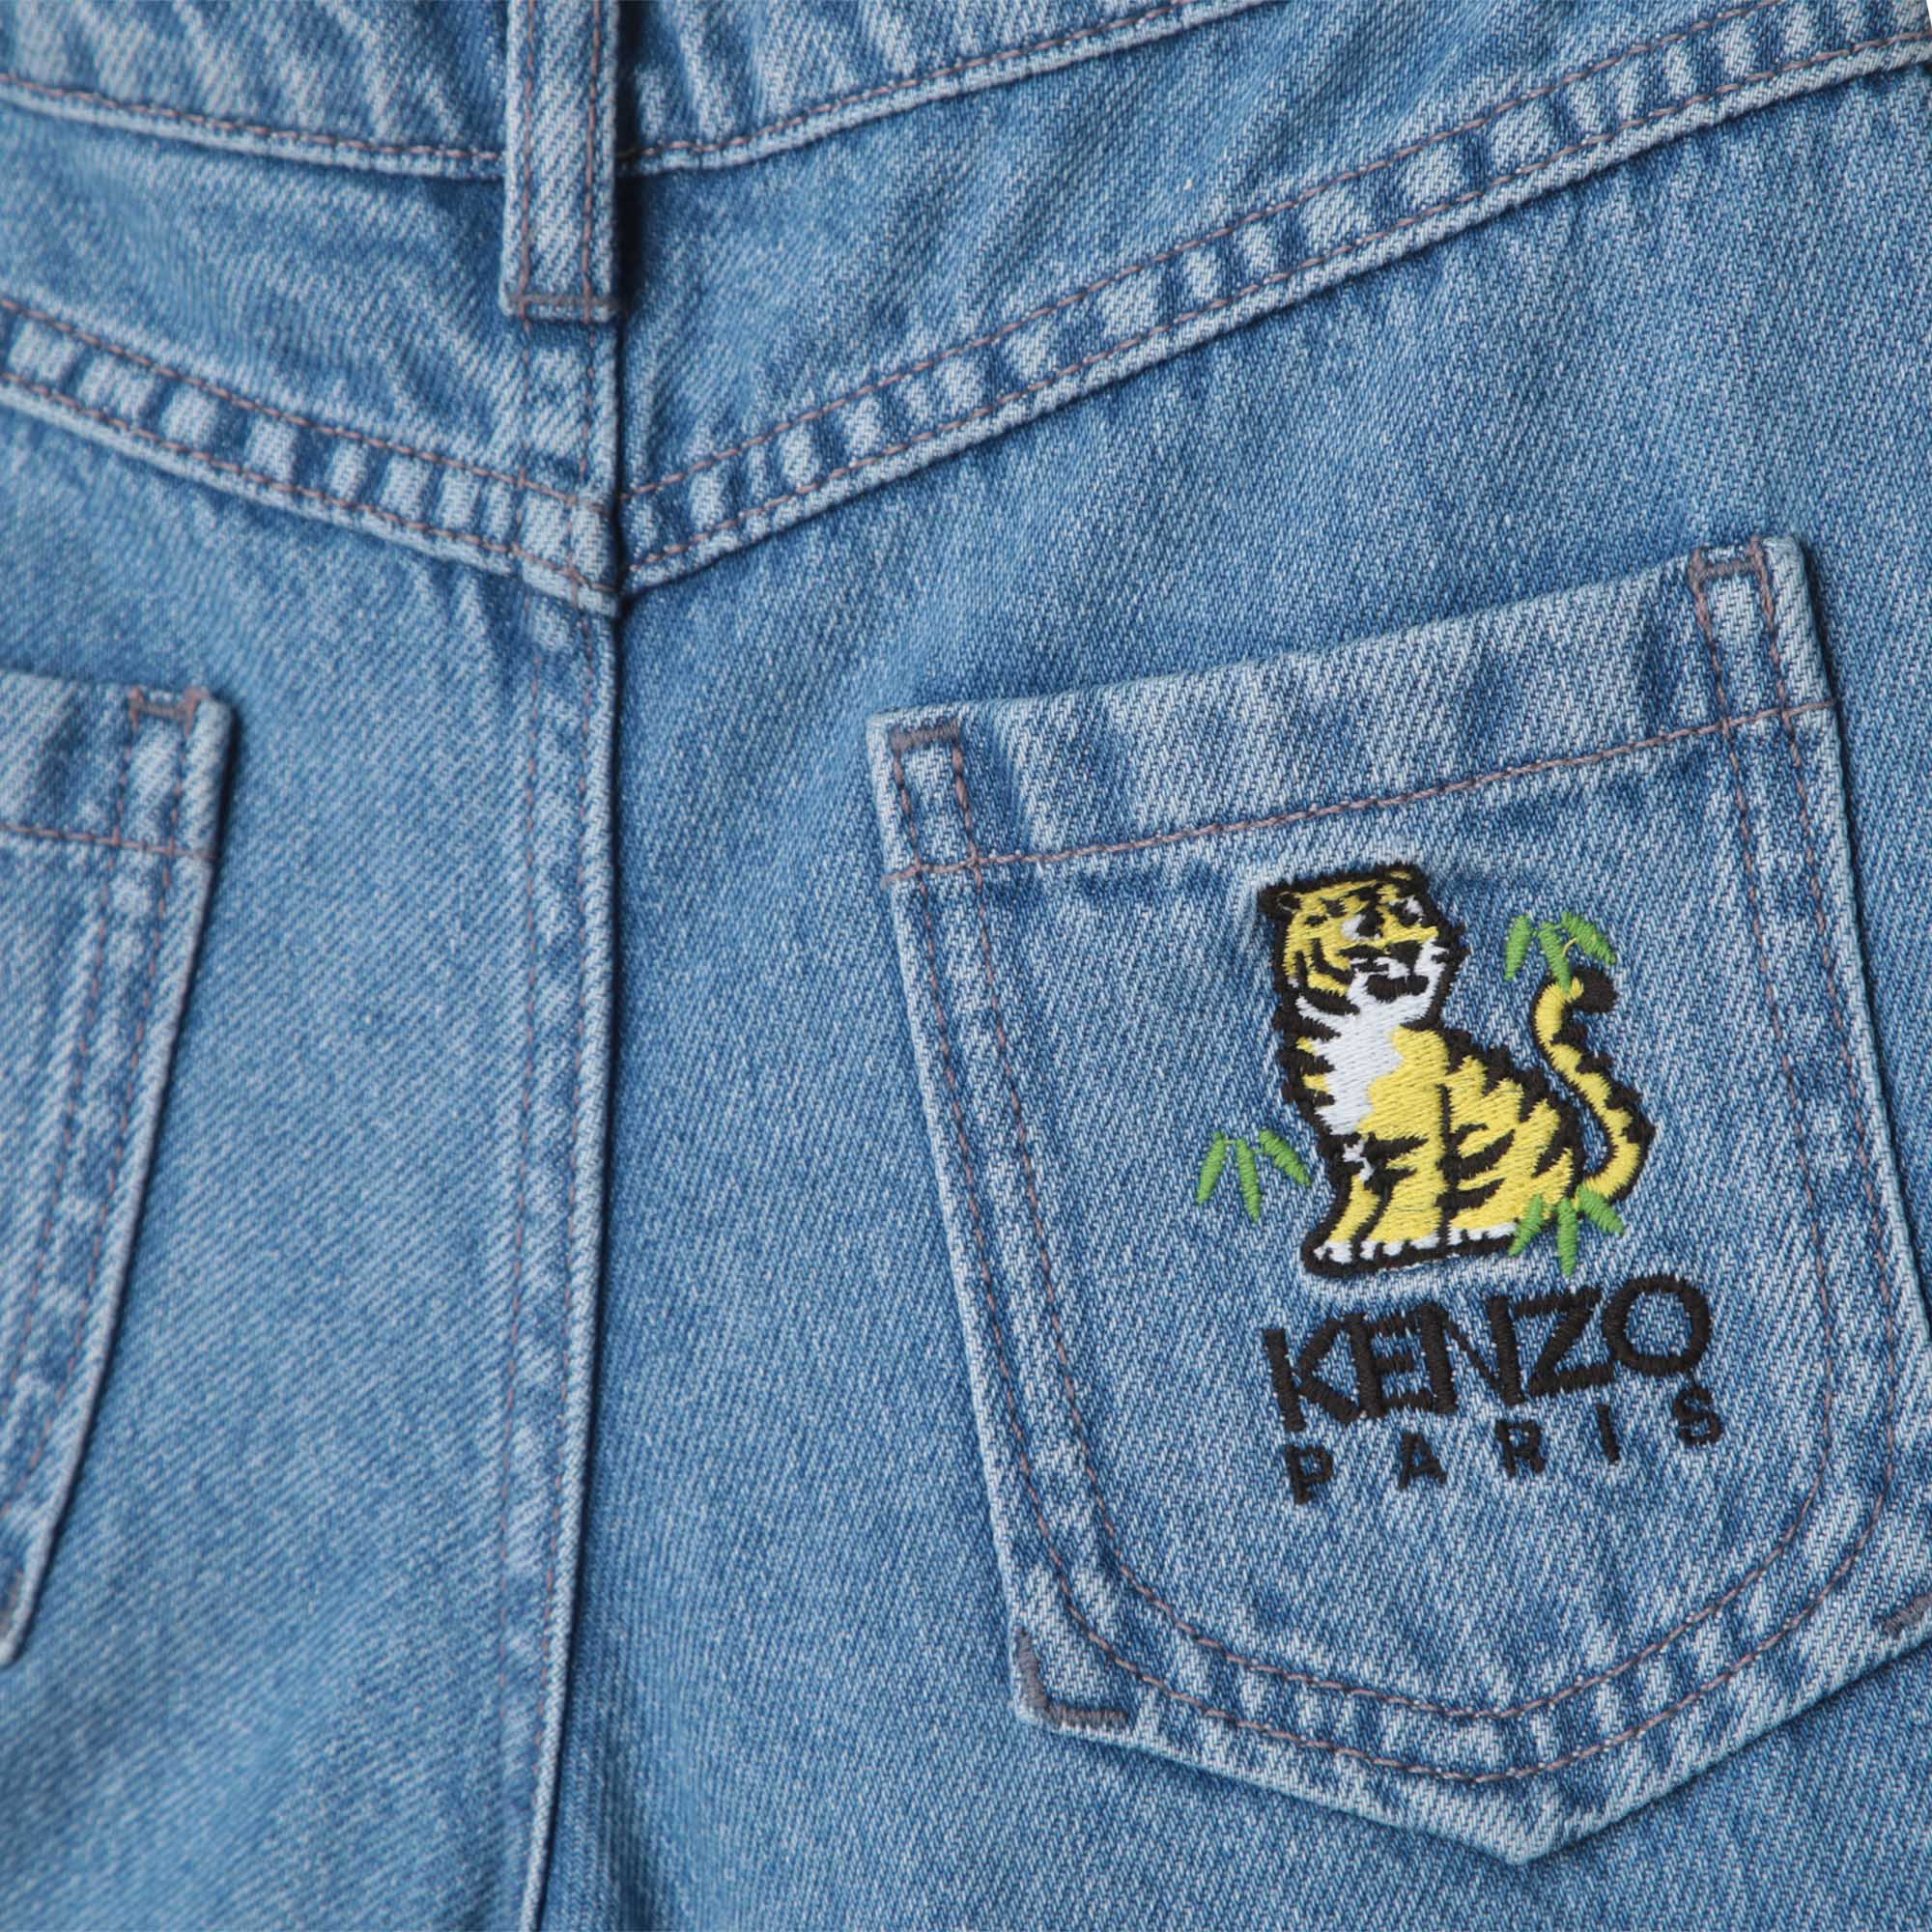 Jeans shorts with embroidery KENZO KIDS for GIRL